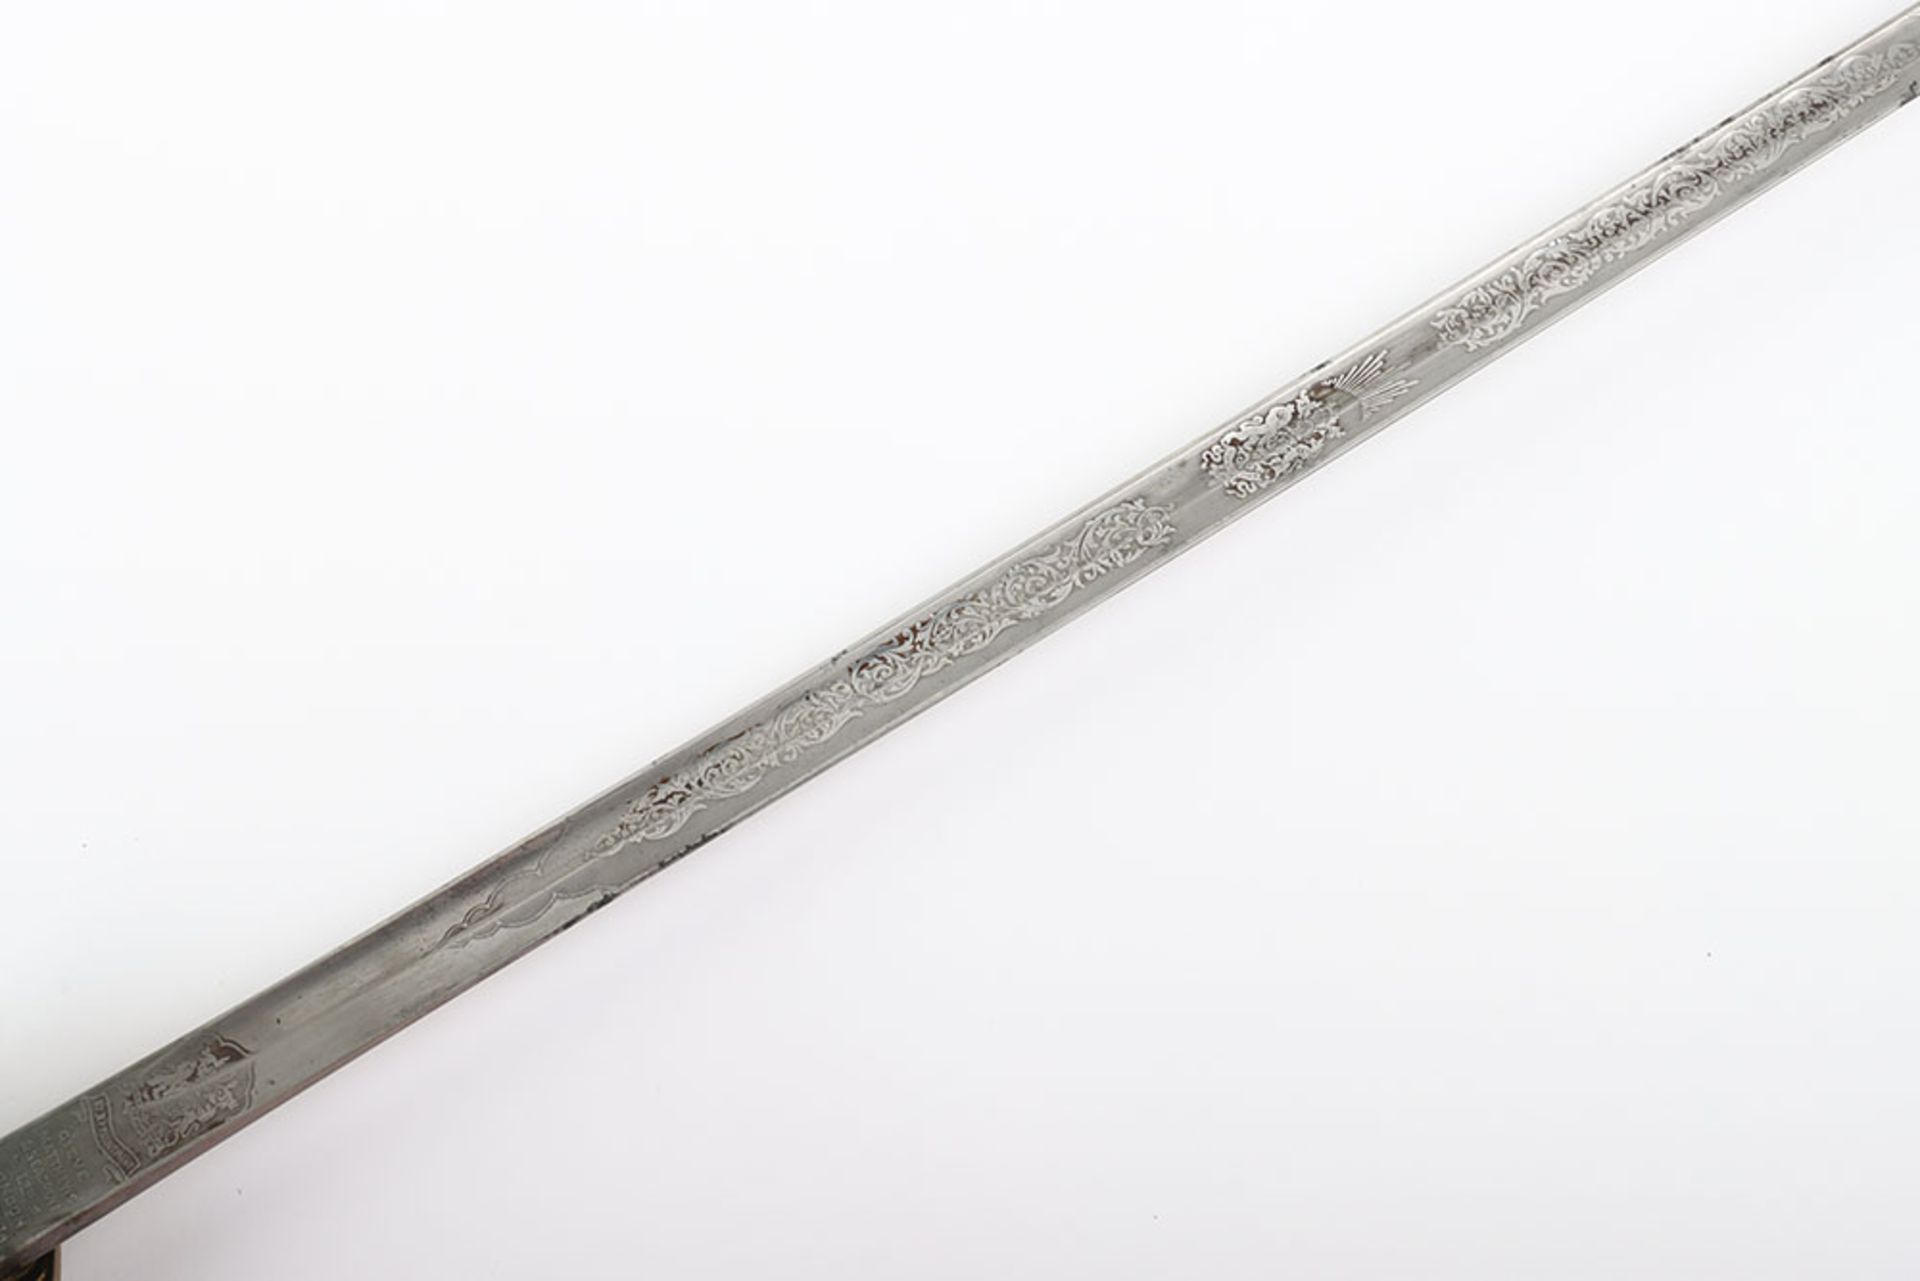 British Post 1902 Naval Officer’s Sword - Image 8 of 18